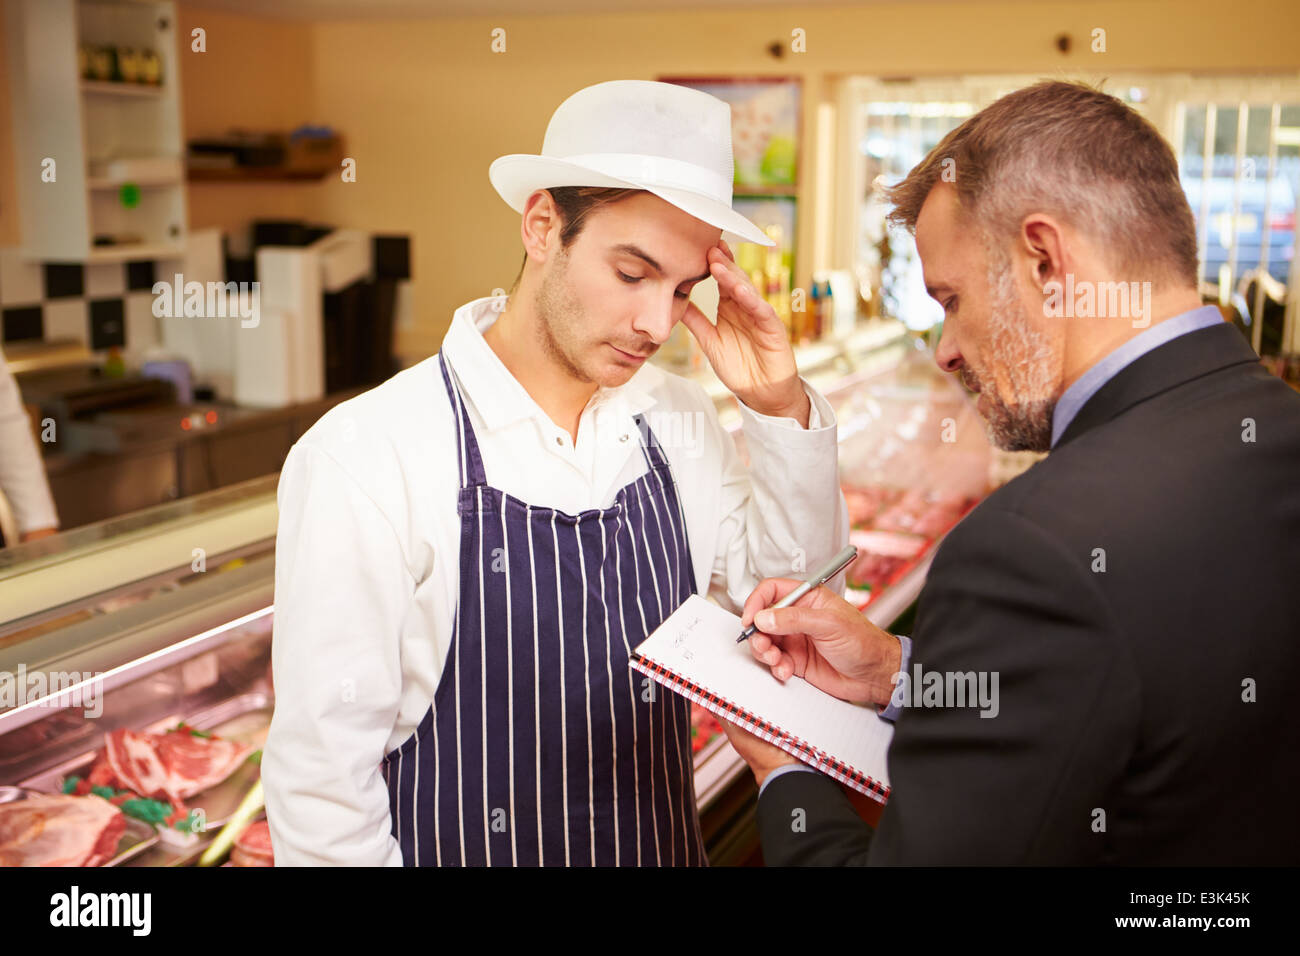 Bank Manager Meeting With Owner Of Butchers Shop Stock Photo